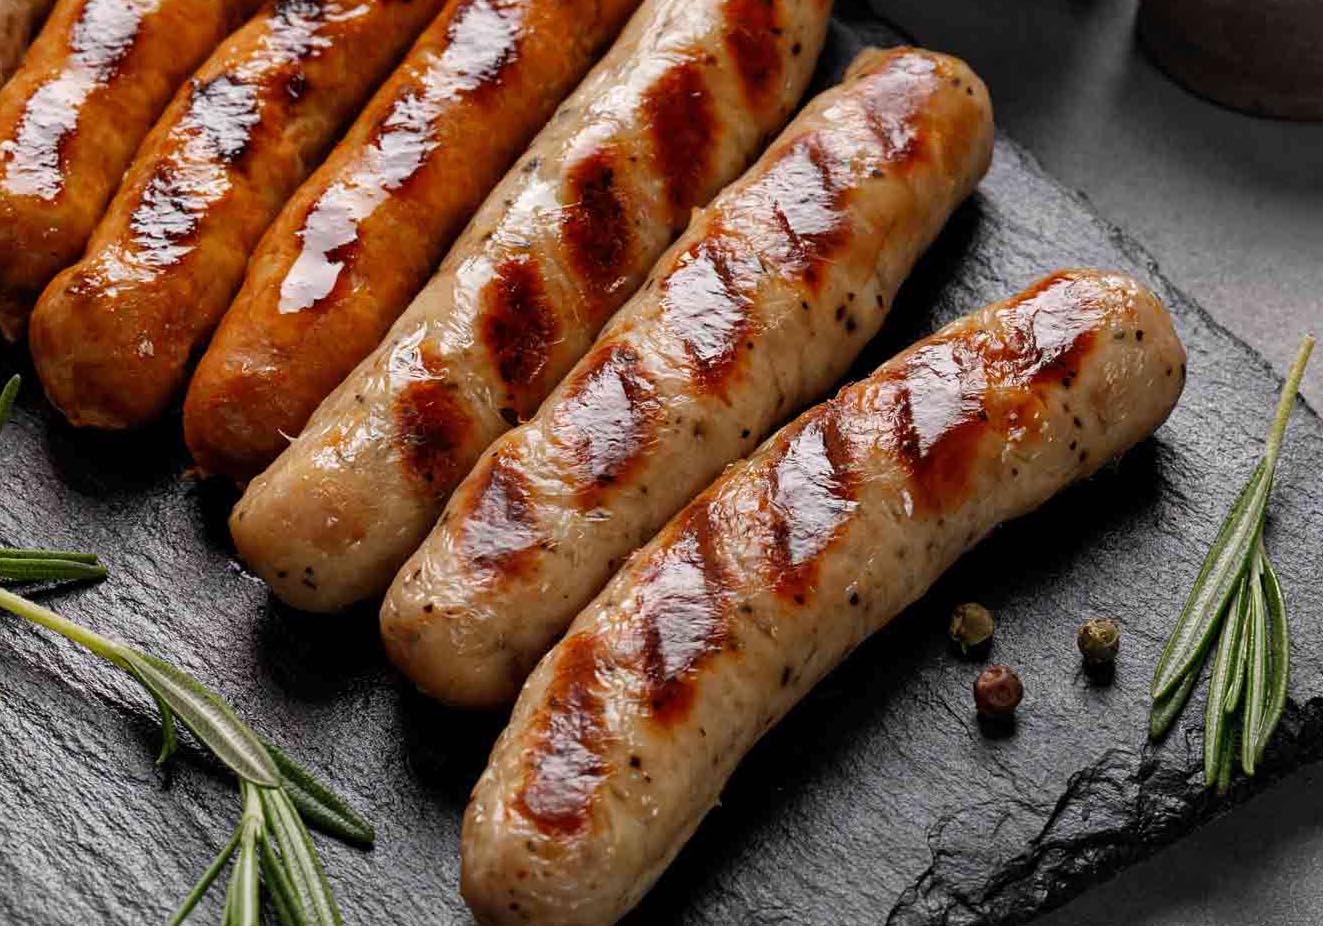 Internal grilling temperatures for sausage